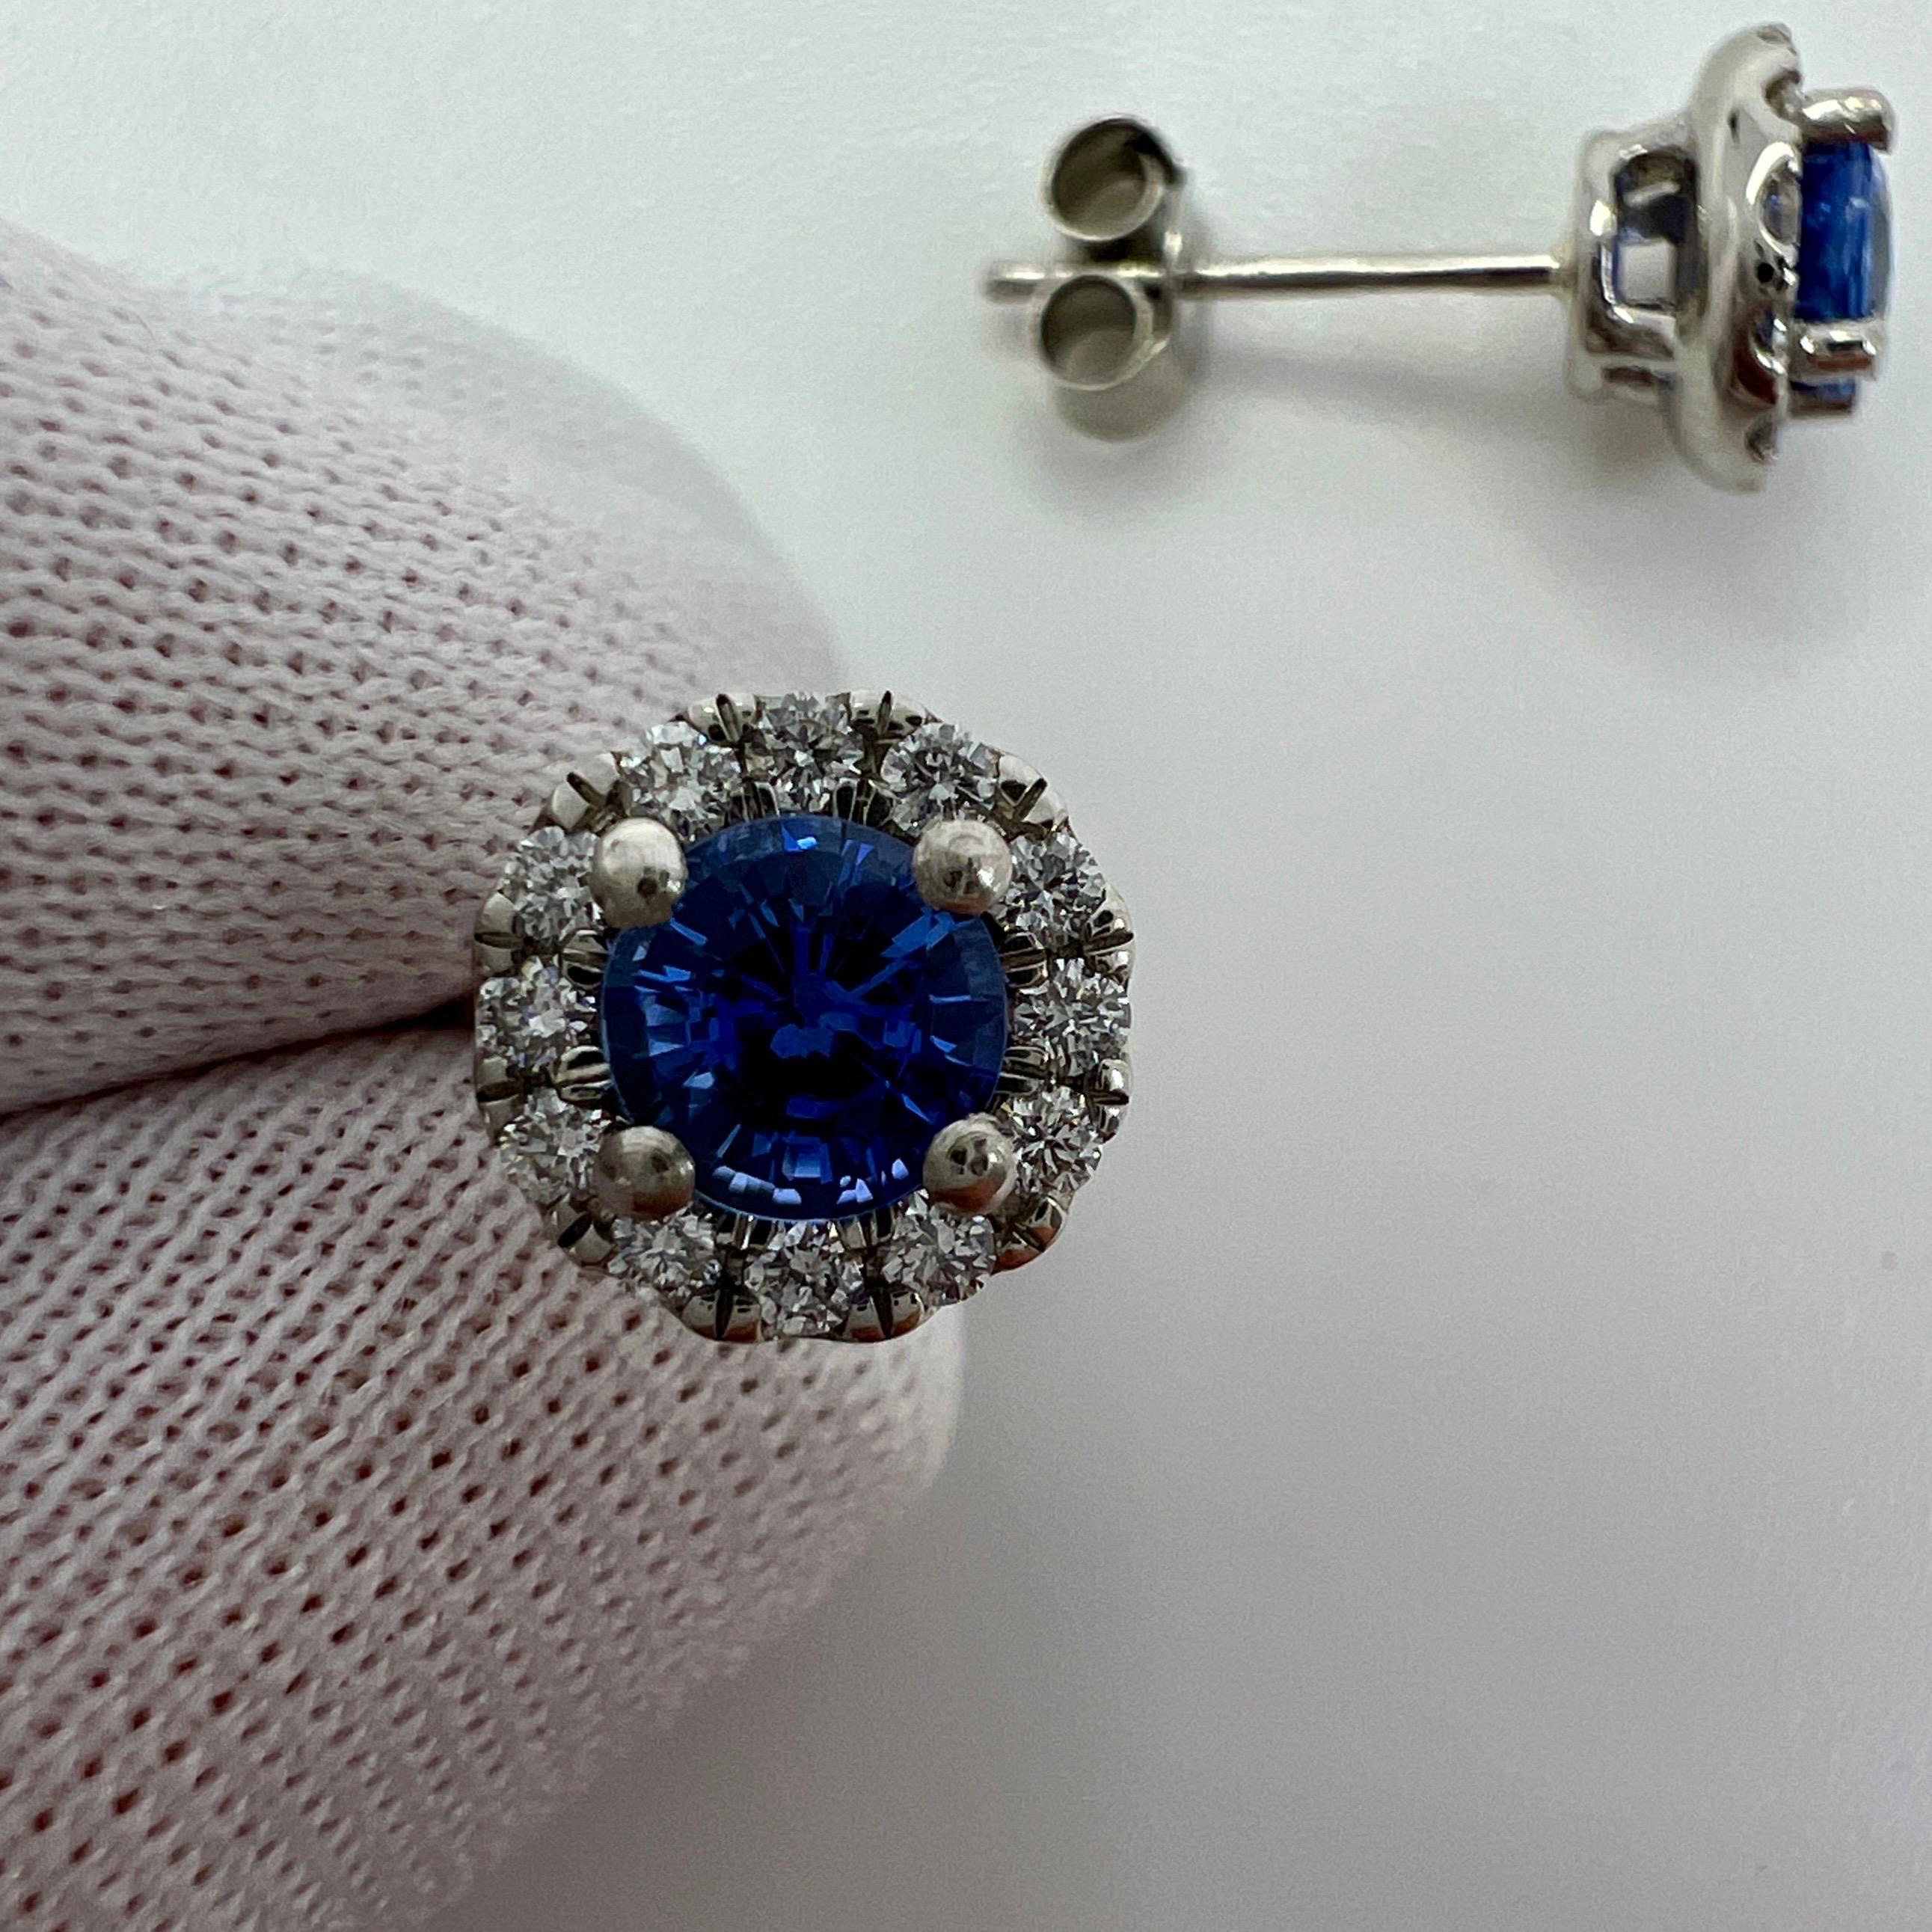 1.37 TCW. Top Grade Ceylon Cornflower Blue Sapphire & Diamond Platinum Earring Halo Studs.

Fine blue 1.07ct 5mm Ceylon sapphires with a vivid cornflower blue colour, excellent clarity and an excellent round brilliant cut. 

Fine quality and perfect